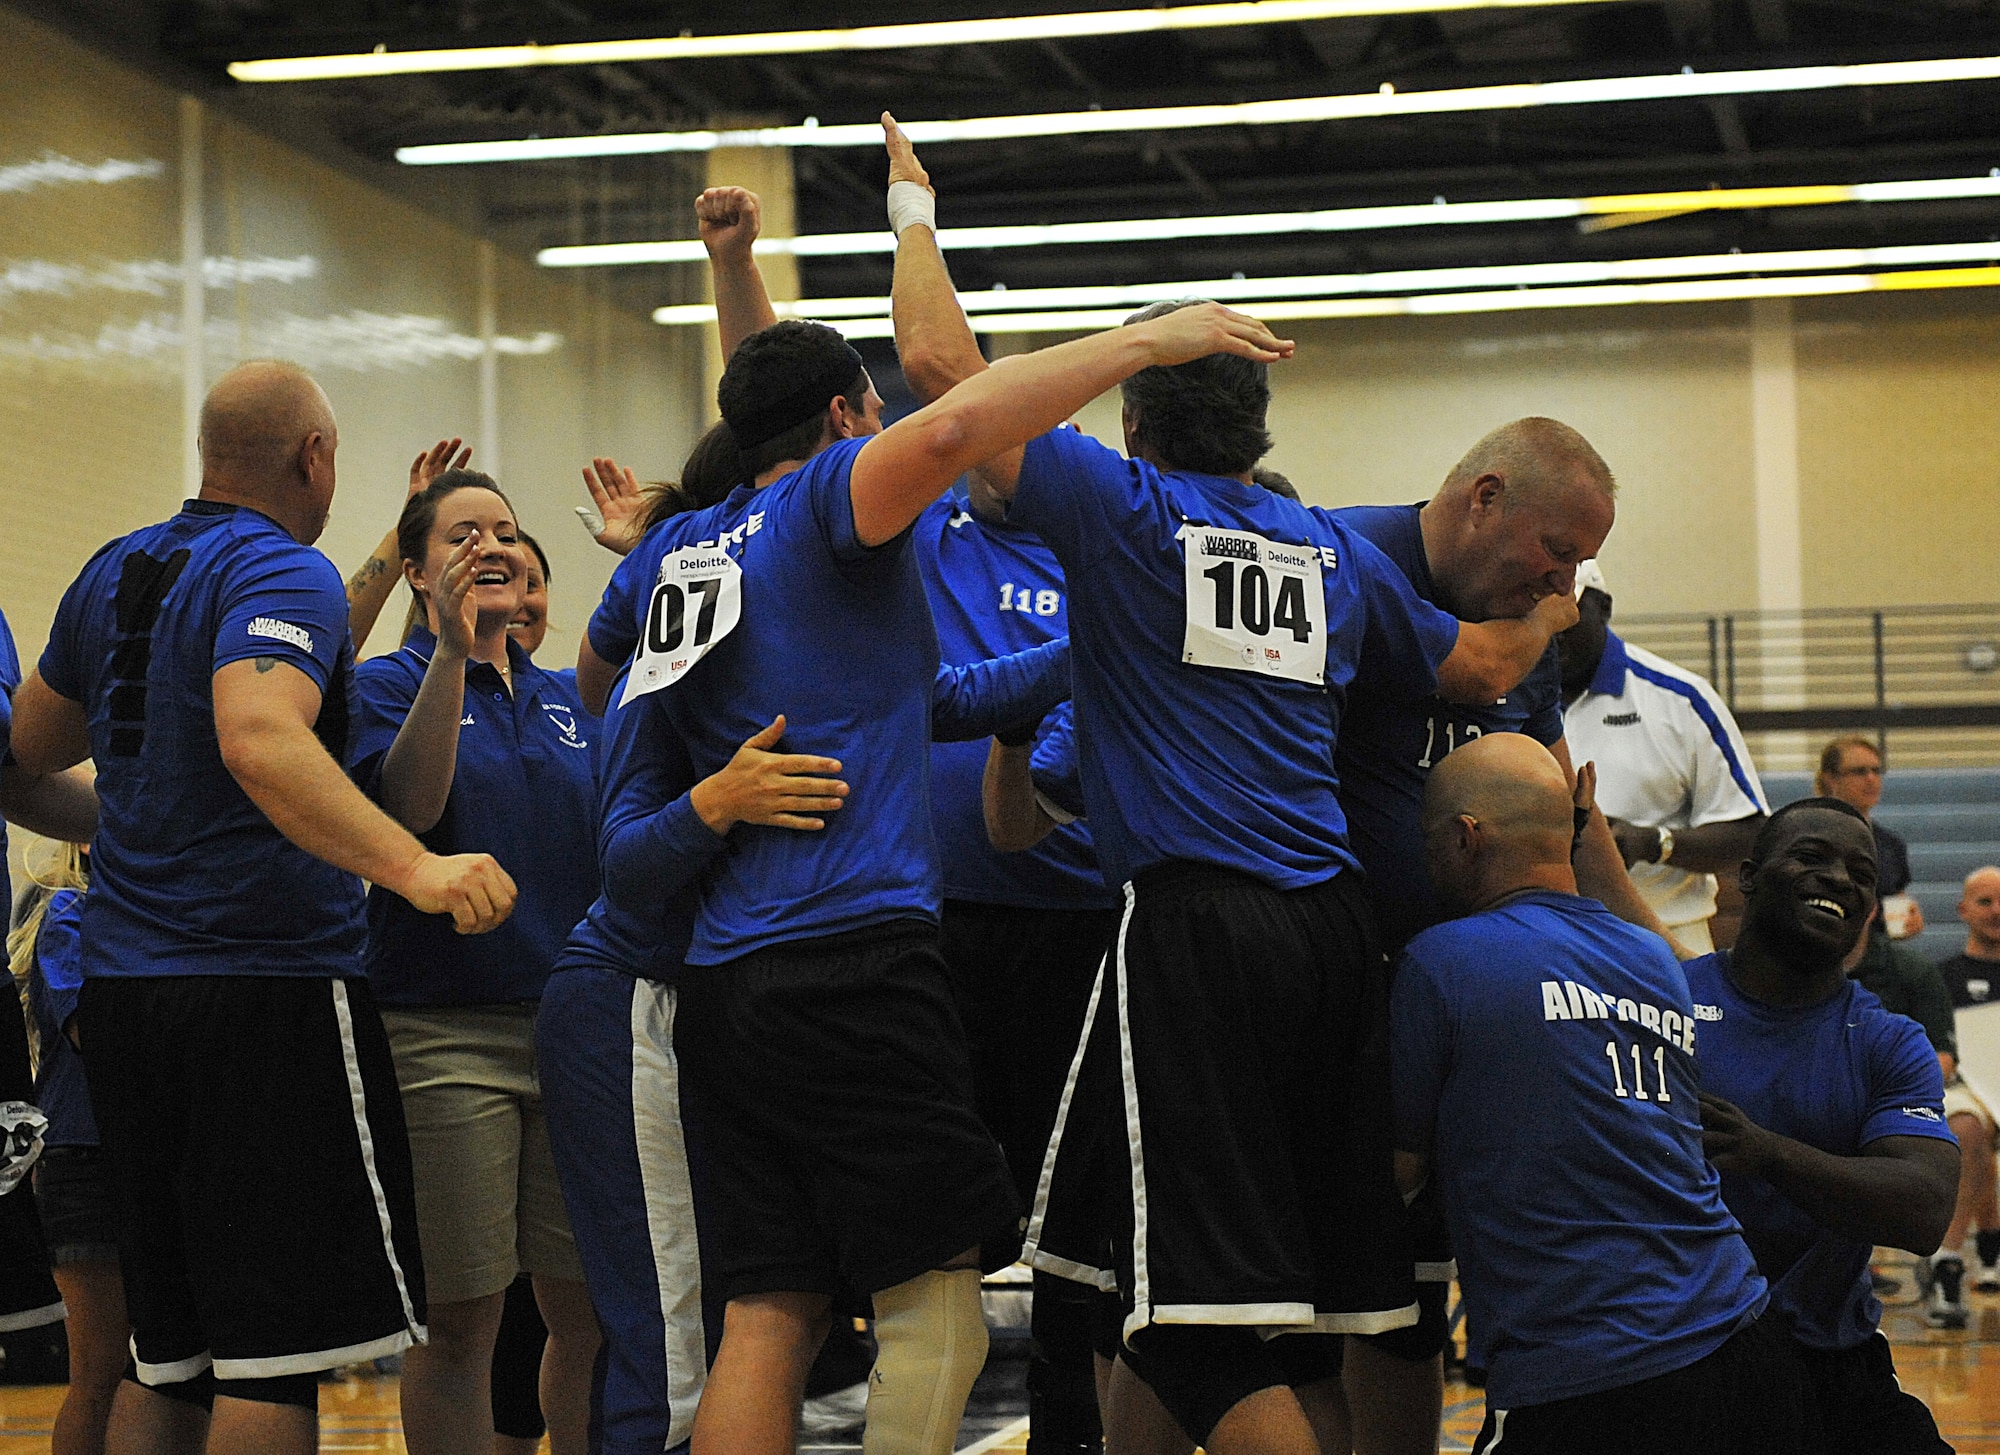 Members of the Air Force sitting volleyball team celebrate after winning the bronze medal against the Special Operations Command team during Warrior Games 2012 at the U.S. Air Force Academy in Colorado Springs, Colo., May 3, 2012. Air Force won 25-12 and 25-20. (U.S. Air Force photo by Val Gempis/Released)